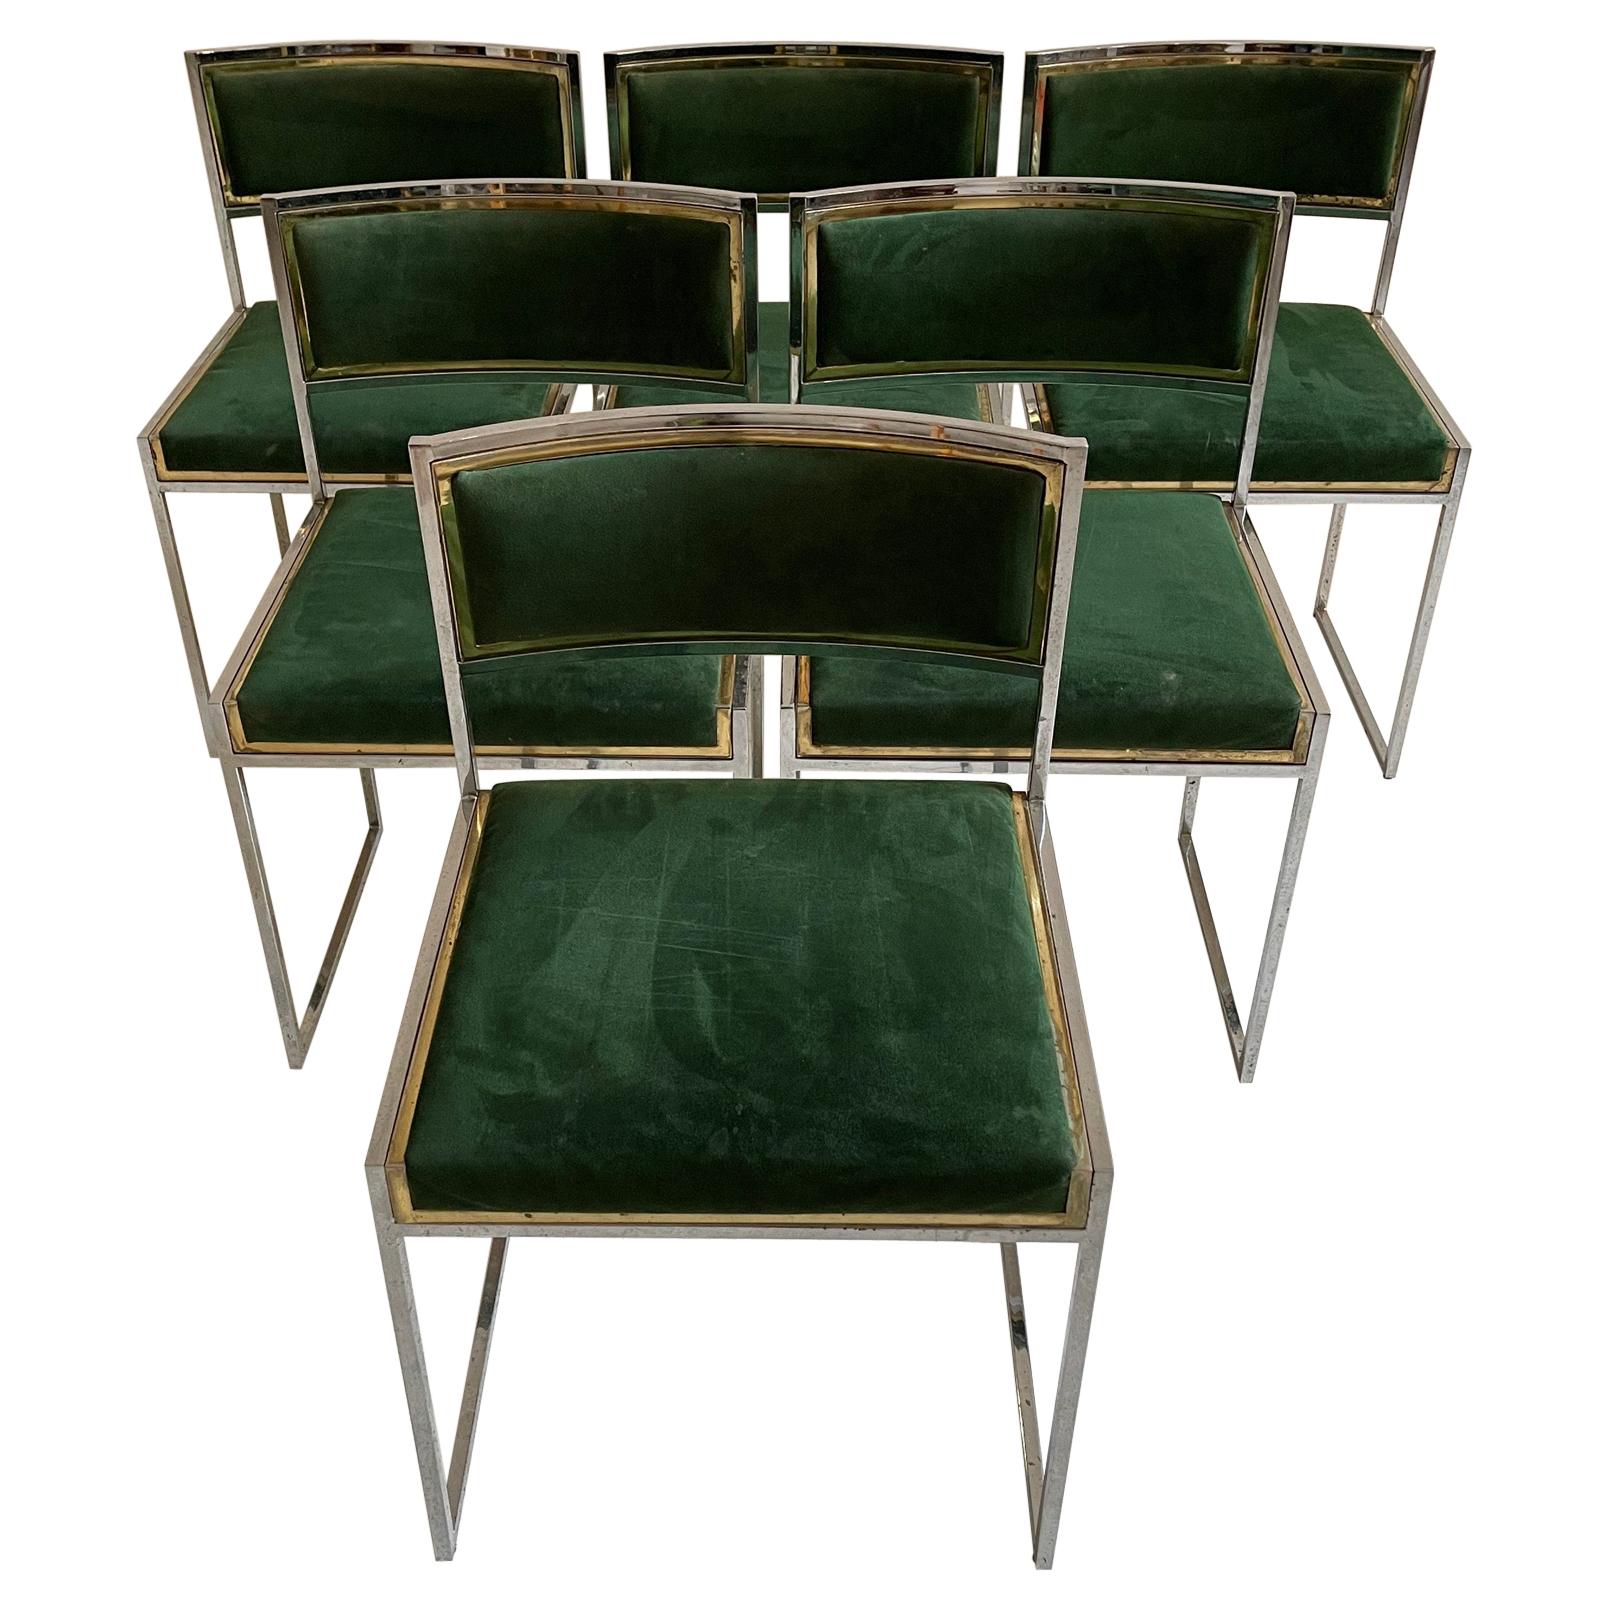 Willy Rizzo Patinated Green Suede Leather Brass Chrome Dining Chairs, Italy 1970